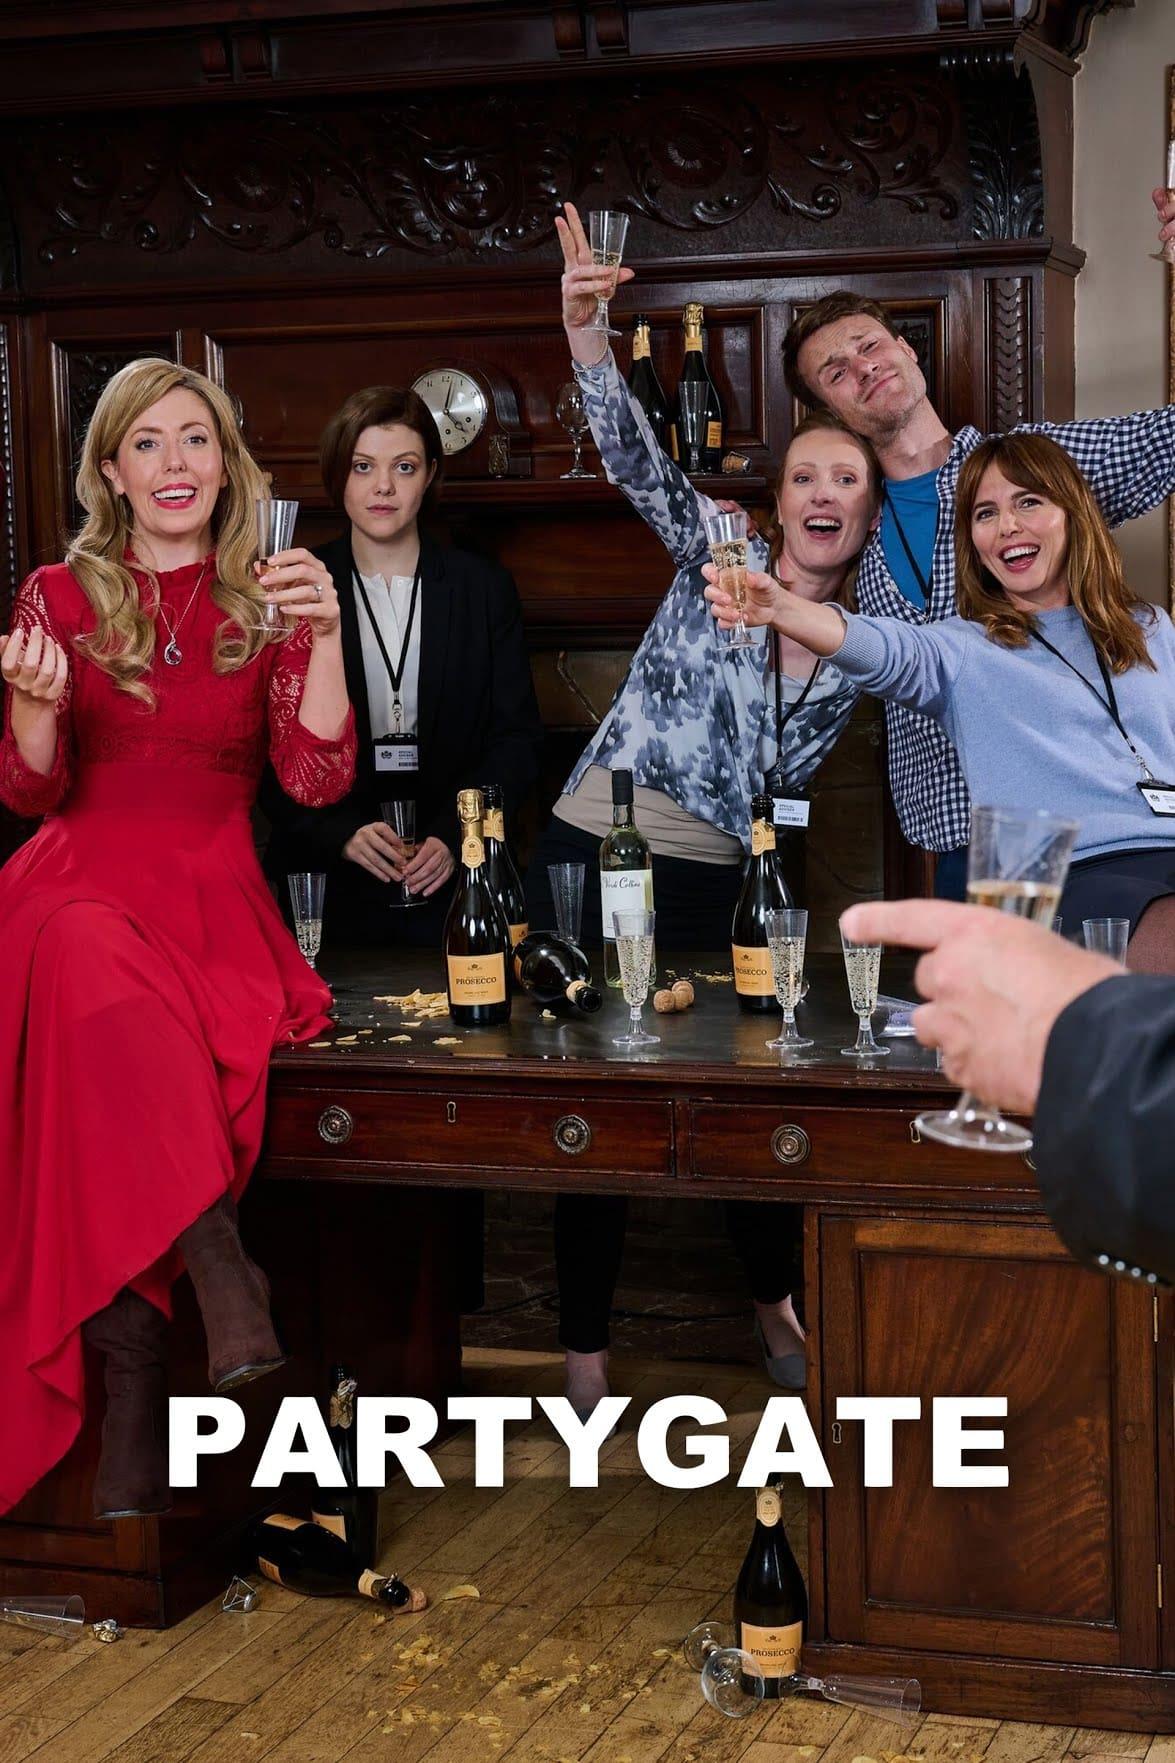 Partygate poster